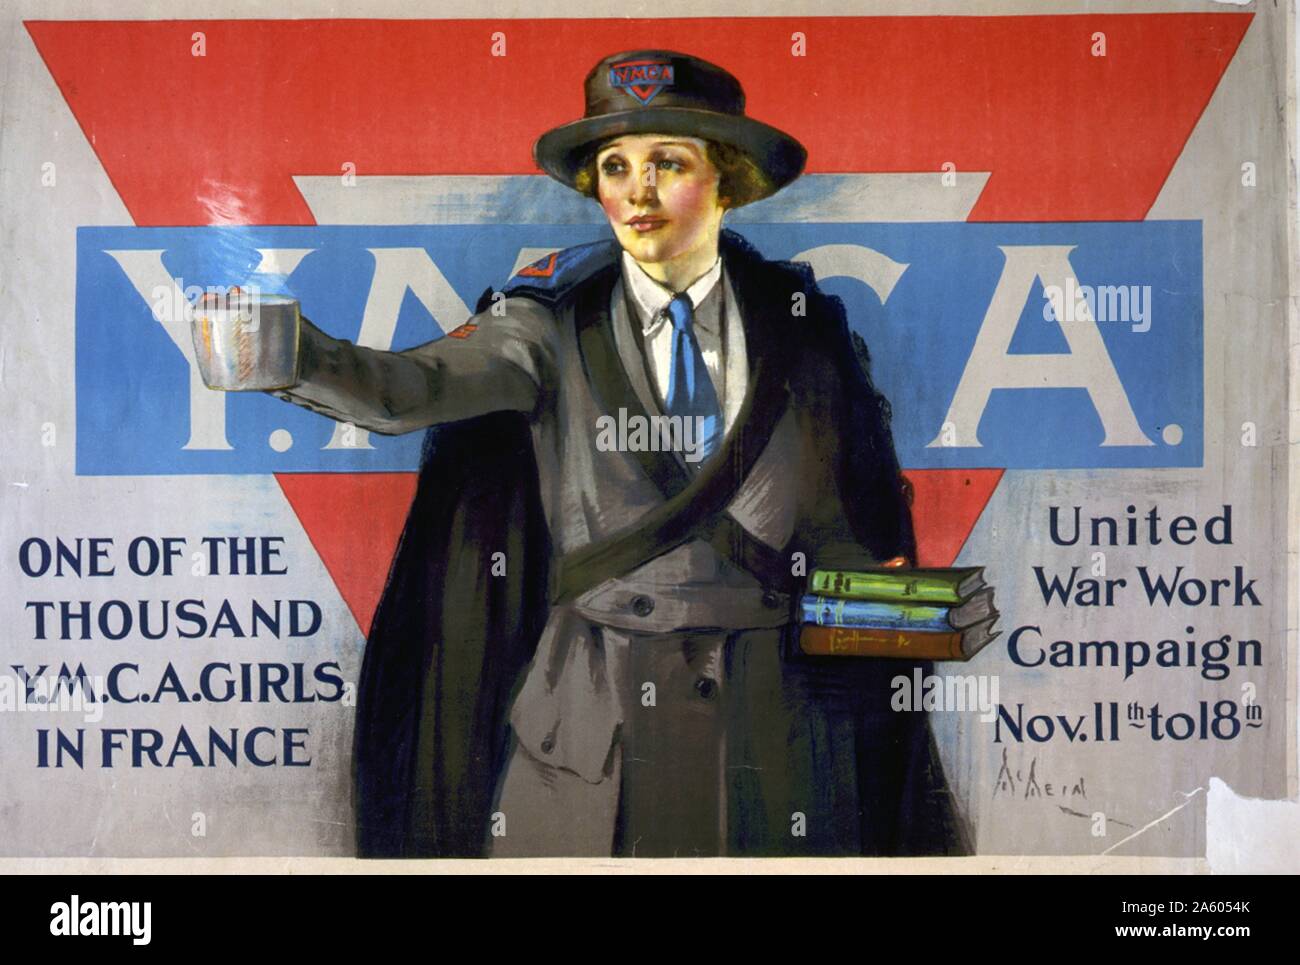 One of the thousand Y.M.C.A. girls in France - United War Work Campaign Nov. 11th to 18th. Poster showing a woman in a Y.M.C.A. uniform offering a steaming cup of coffee and books. Stock Photo